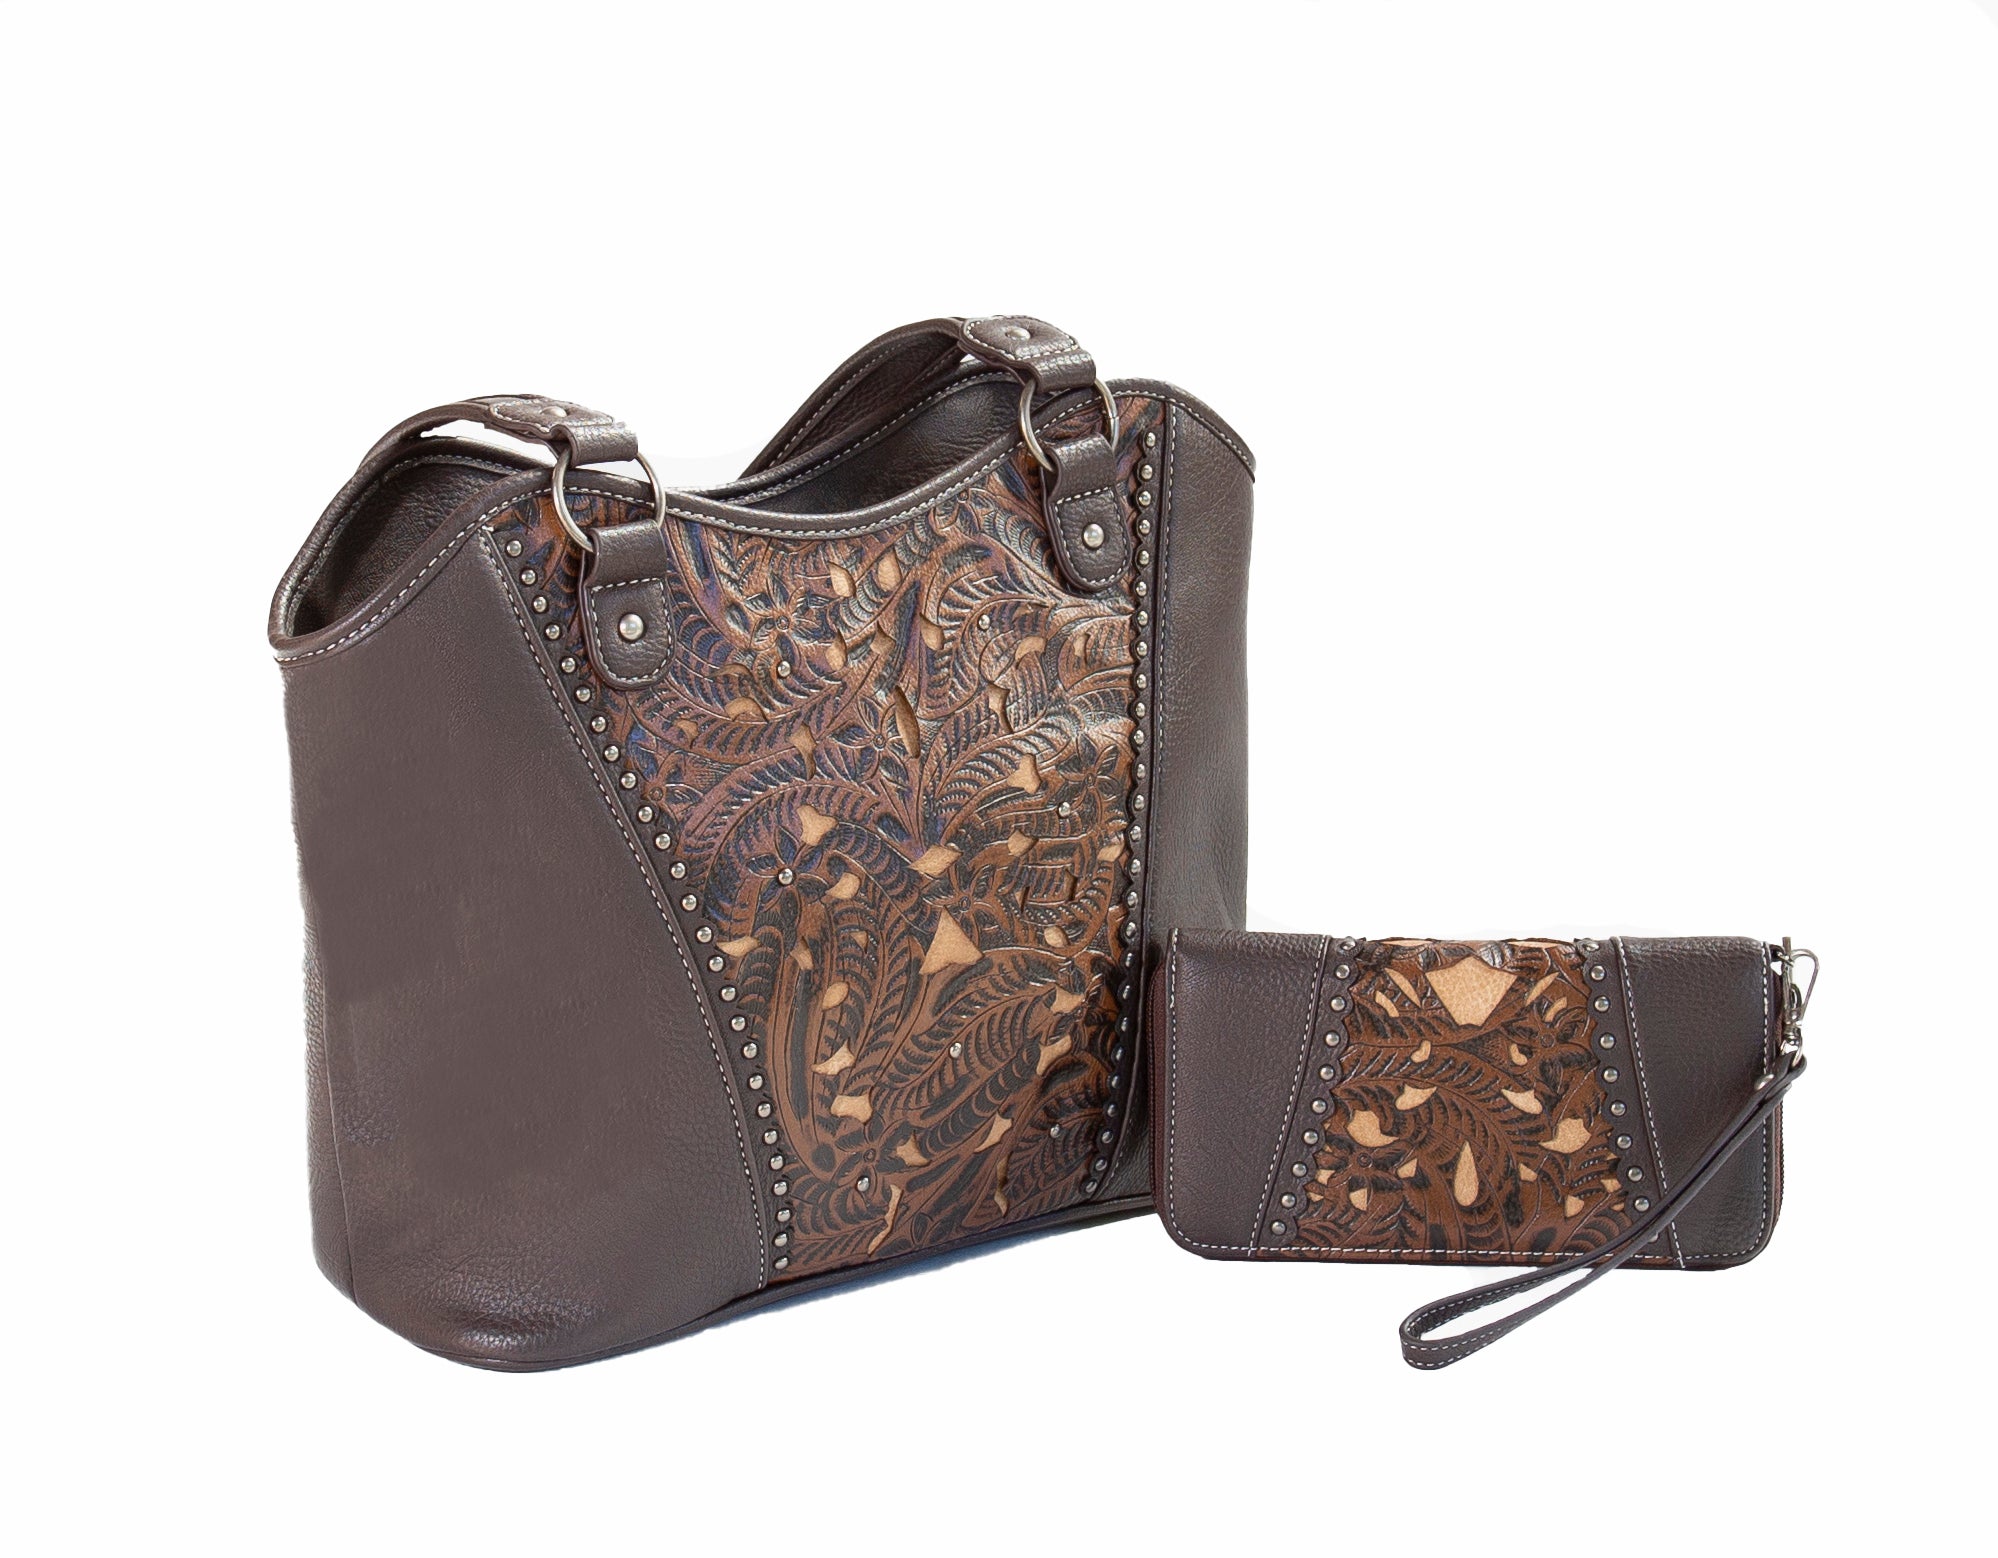 Accessories by Outback Supply Co. Purses, handbags, cuffs and more